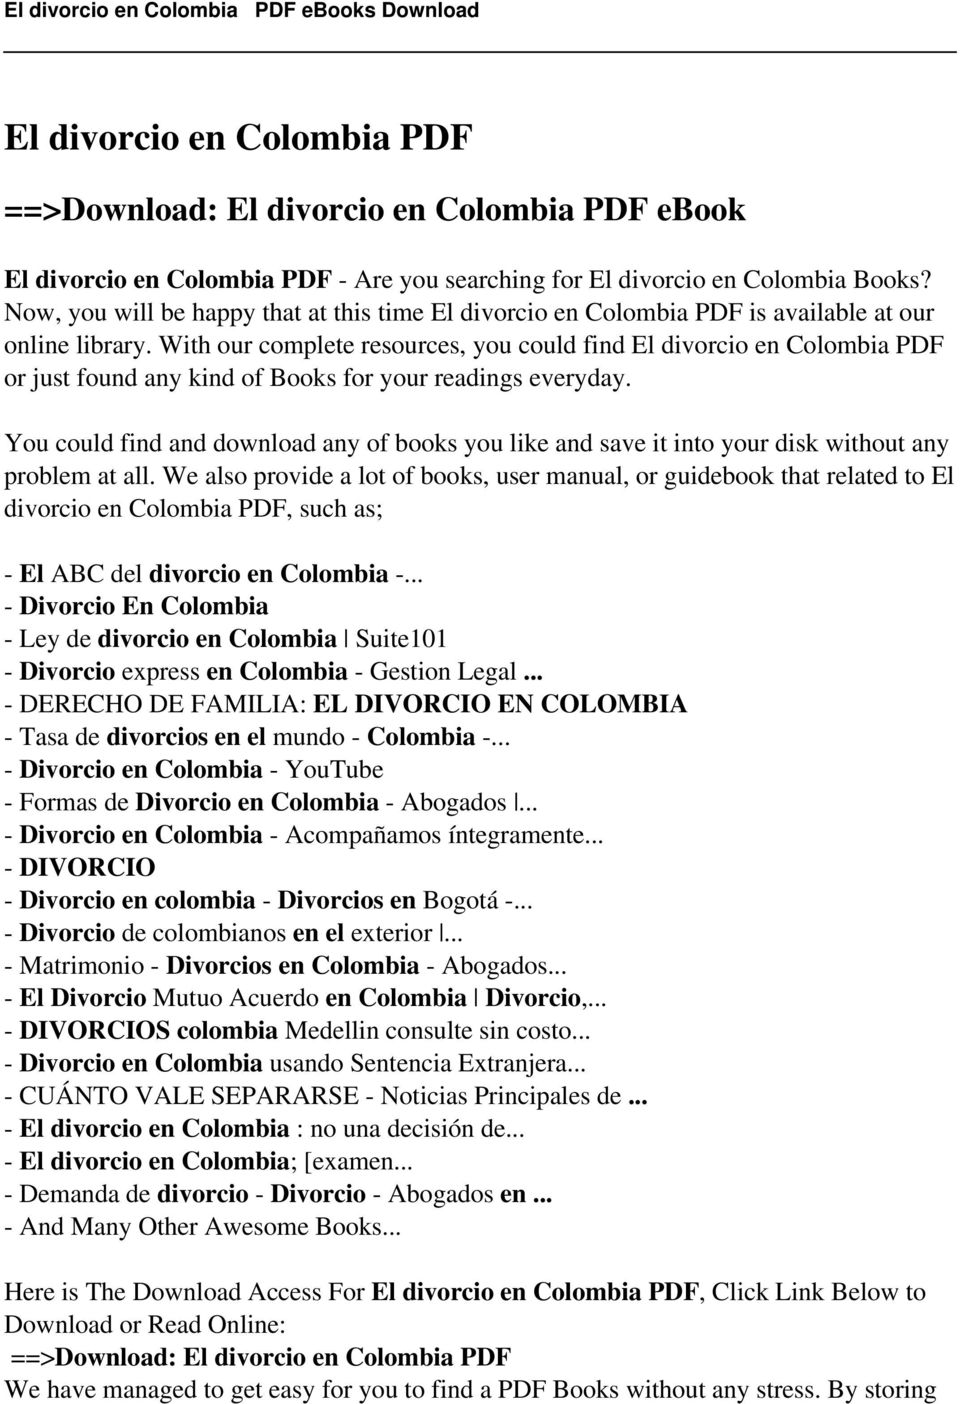 With our complete resources, you could find El divorcio en Colombia PDF or just found any kind of Books for your readings everyday.